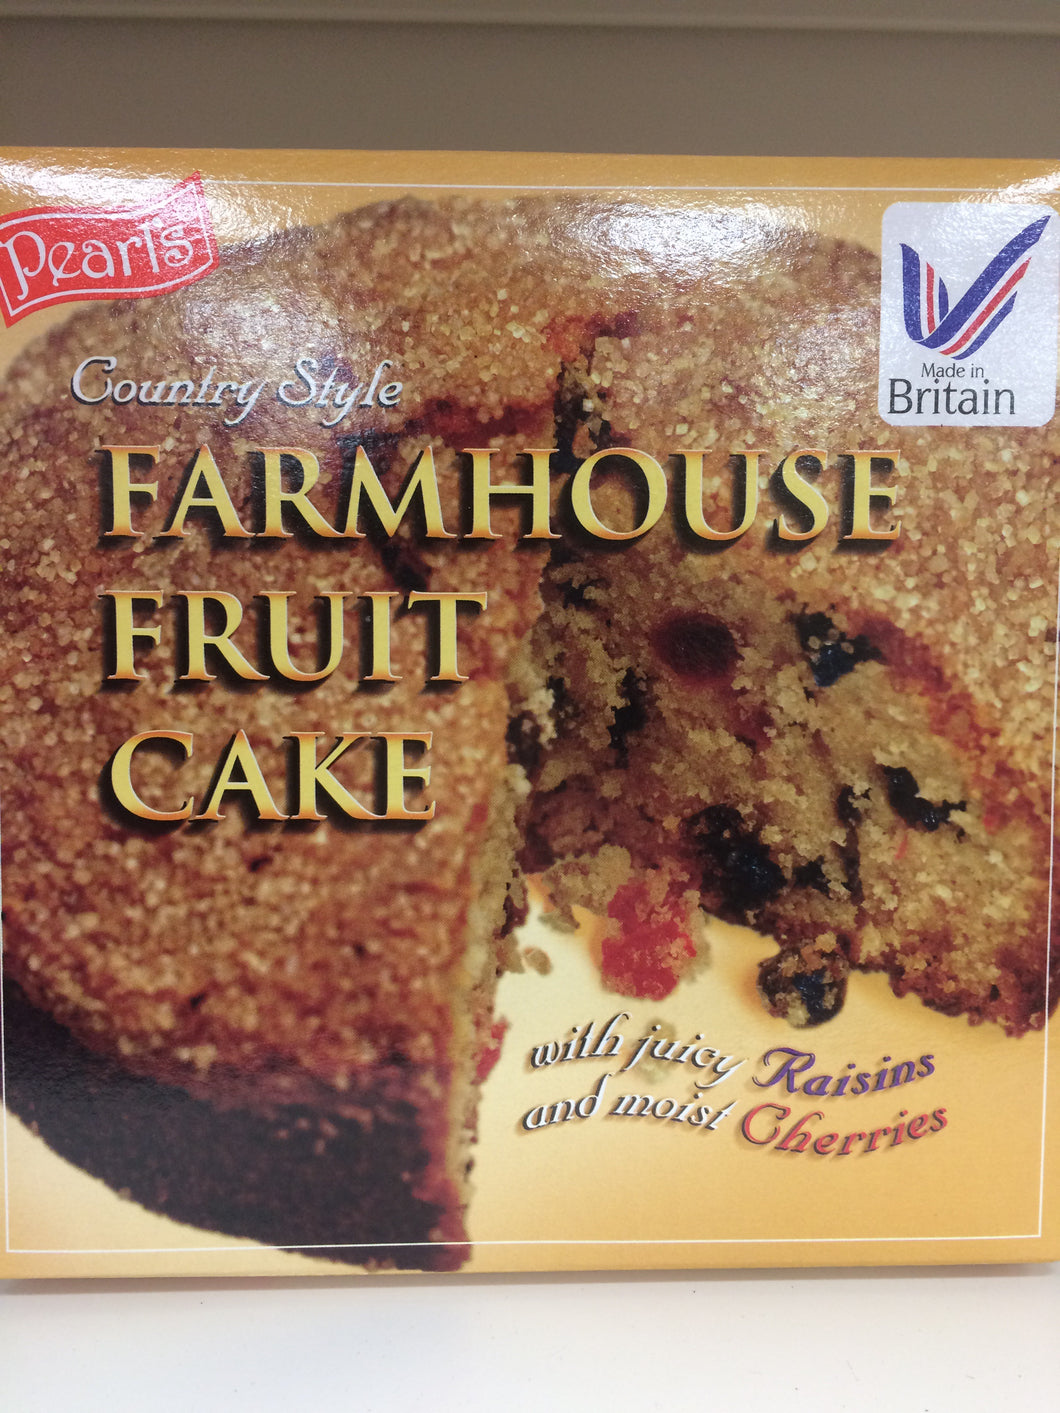 Pearl's Country Style Farmhouse Fruit Cake